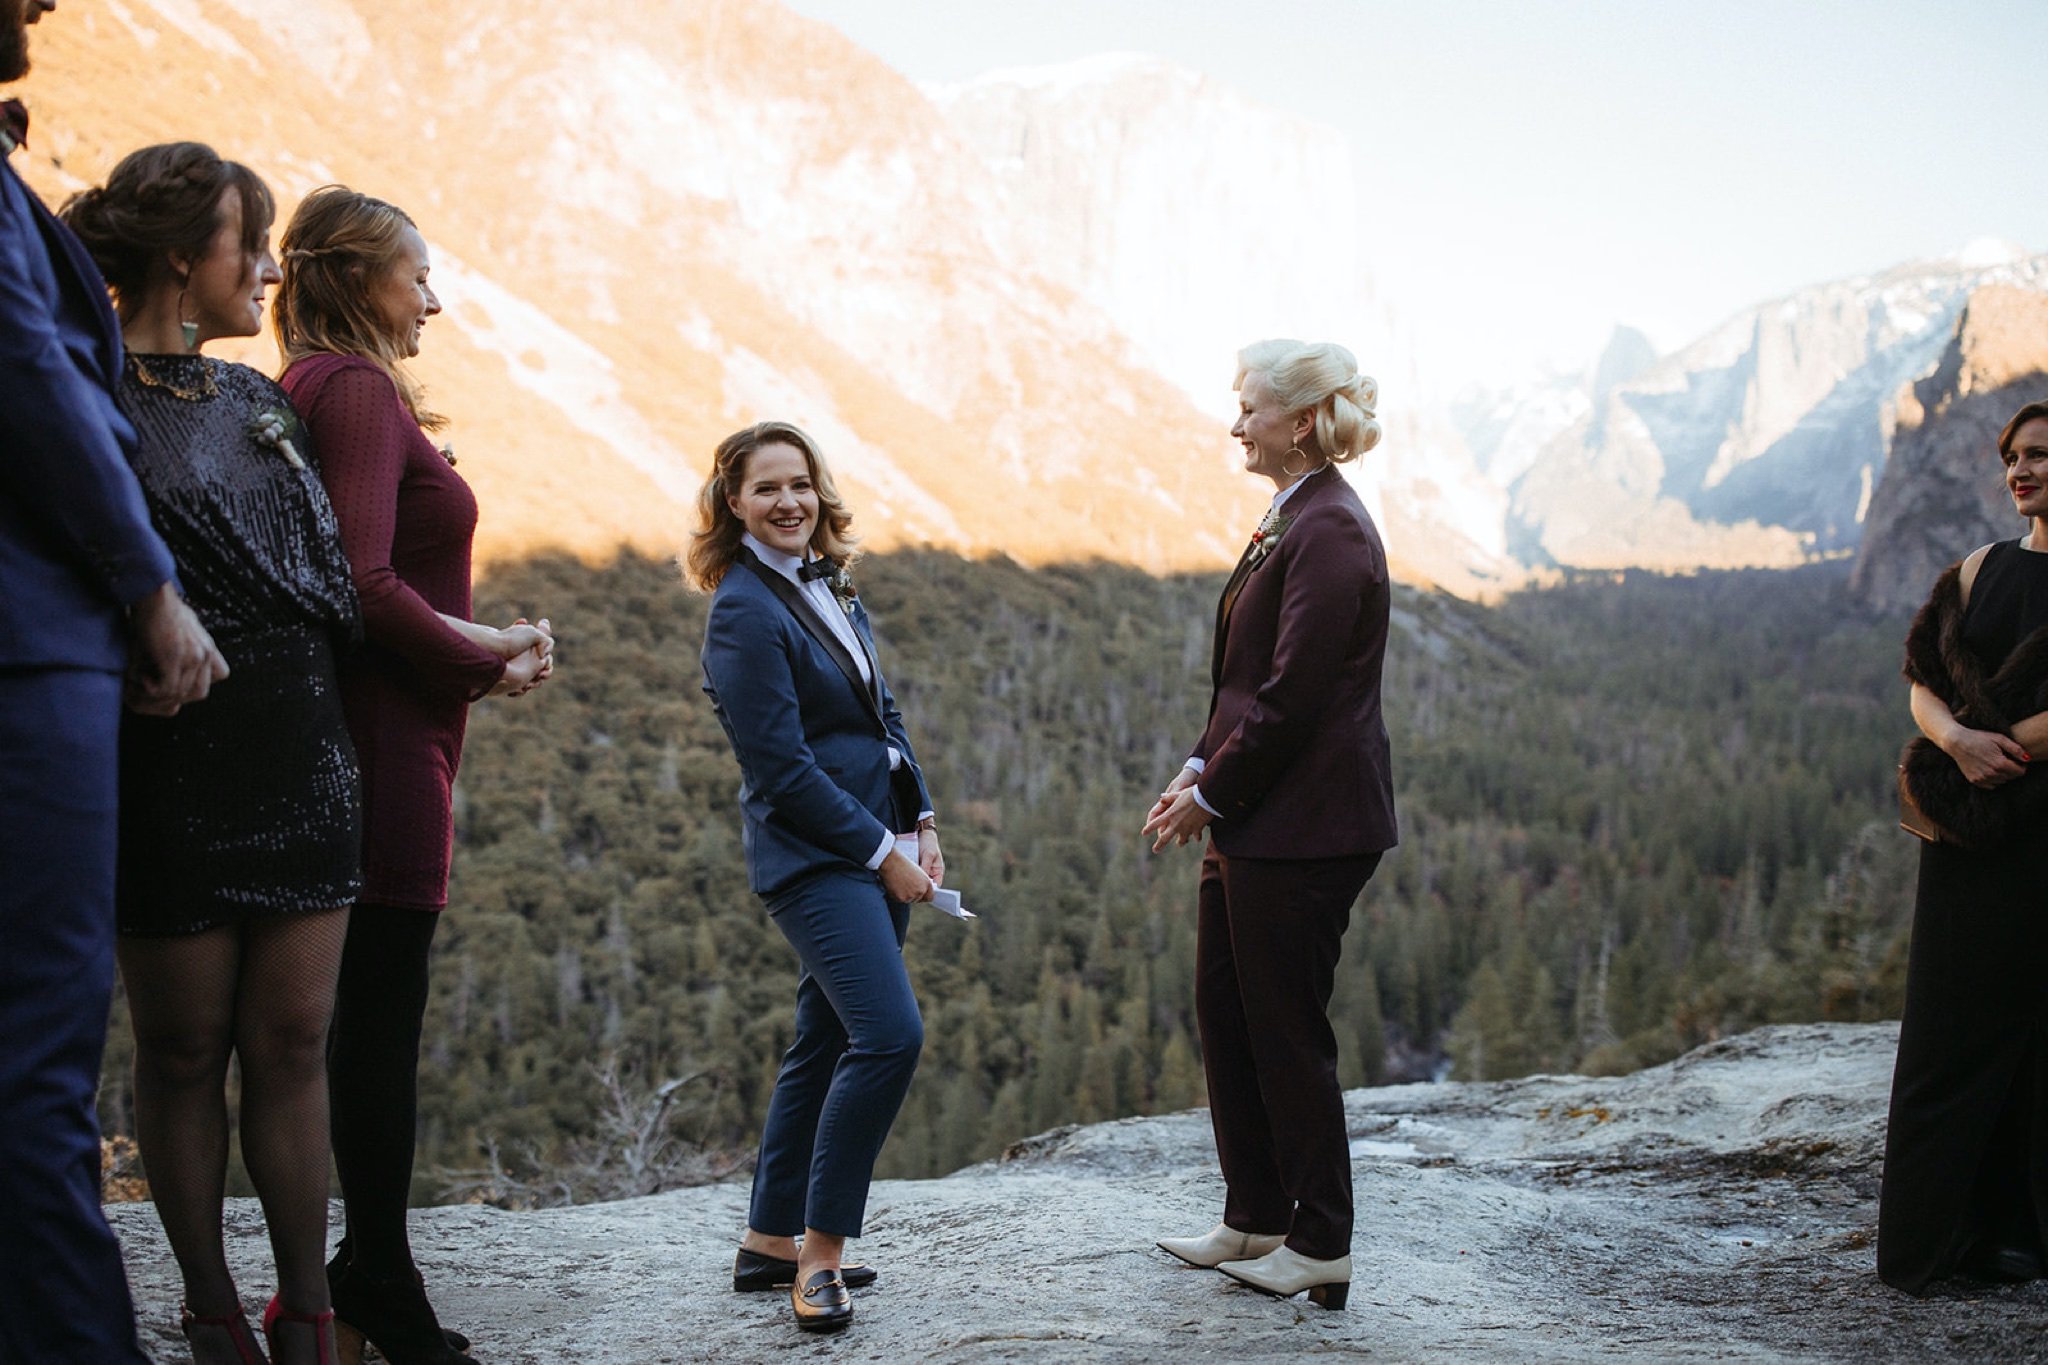 LGBT-Yosemite-National-Park-Elopement-with-Two-Brides-Will-Khoury-Elopement-Photographer_43.jpg